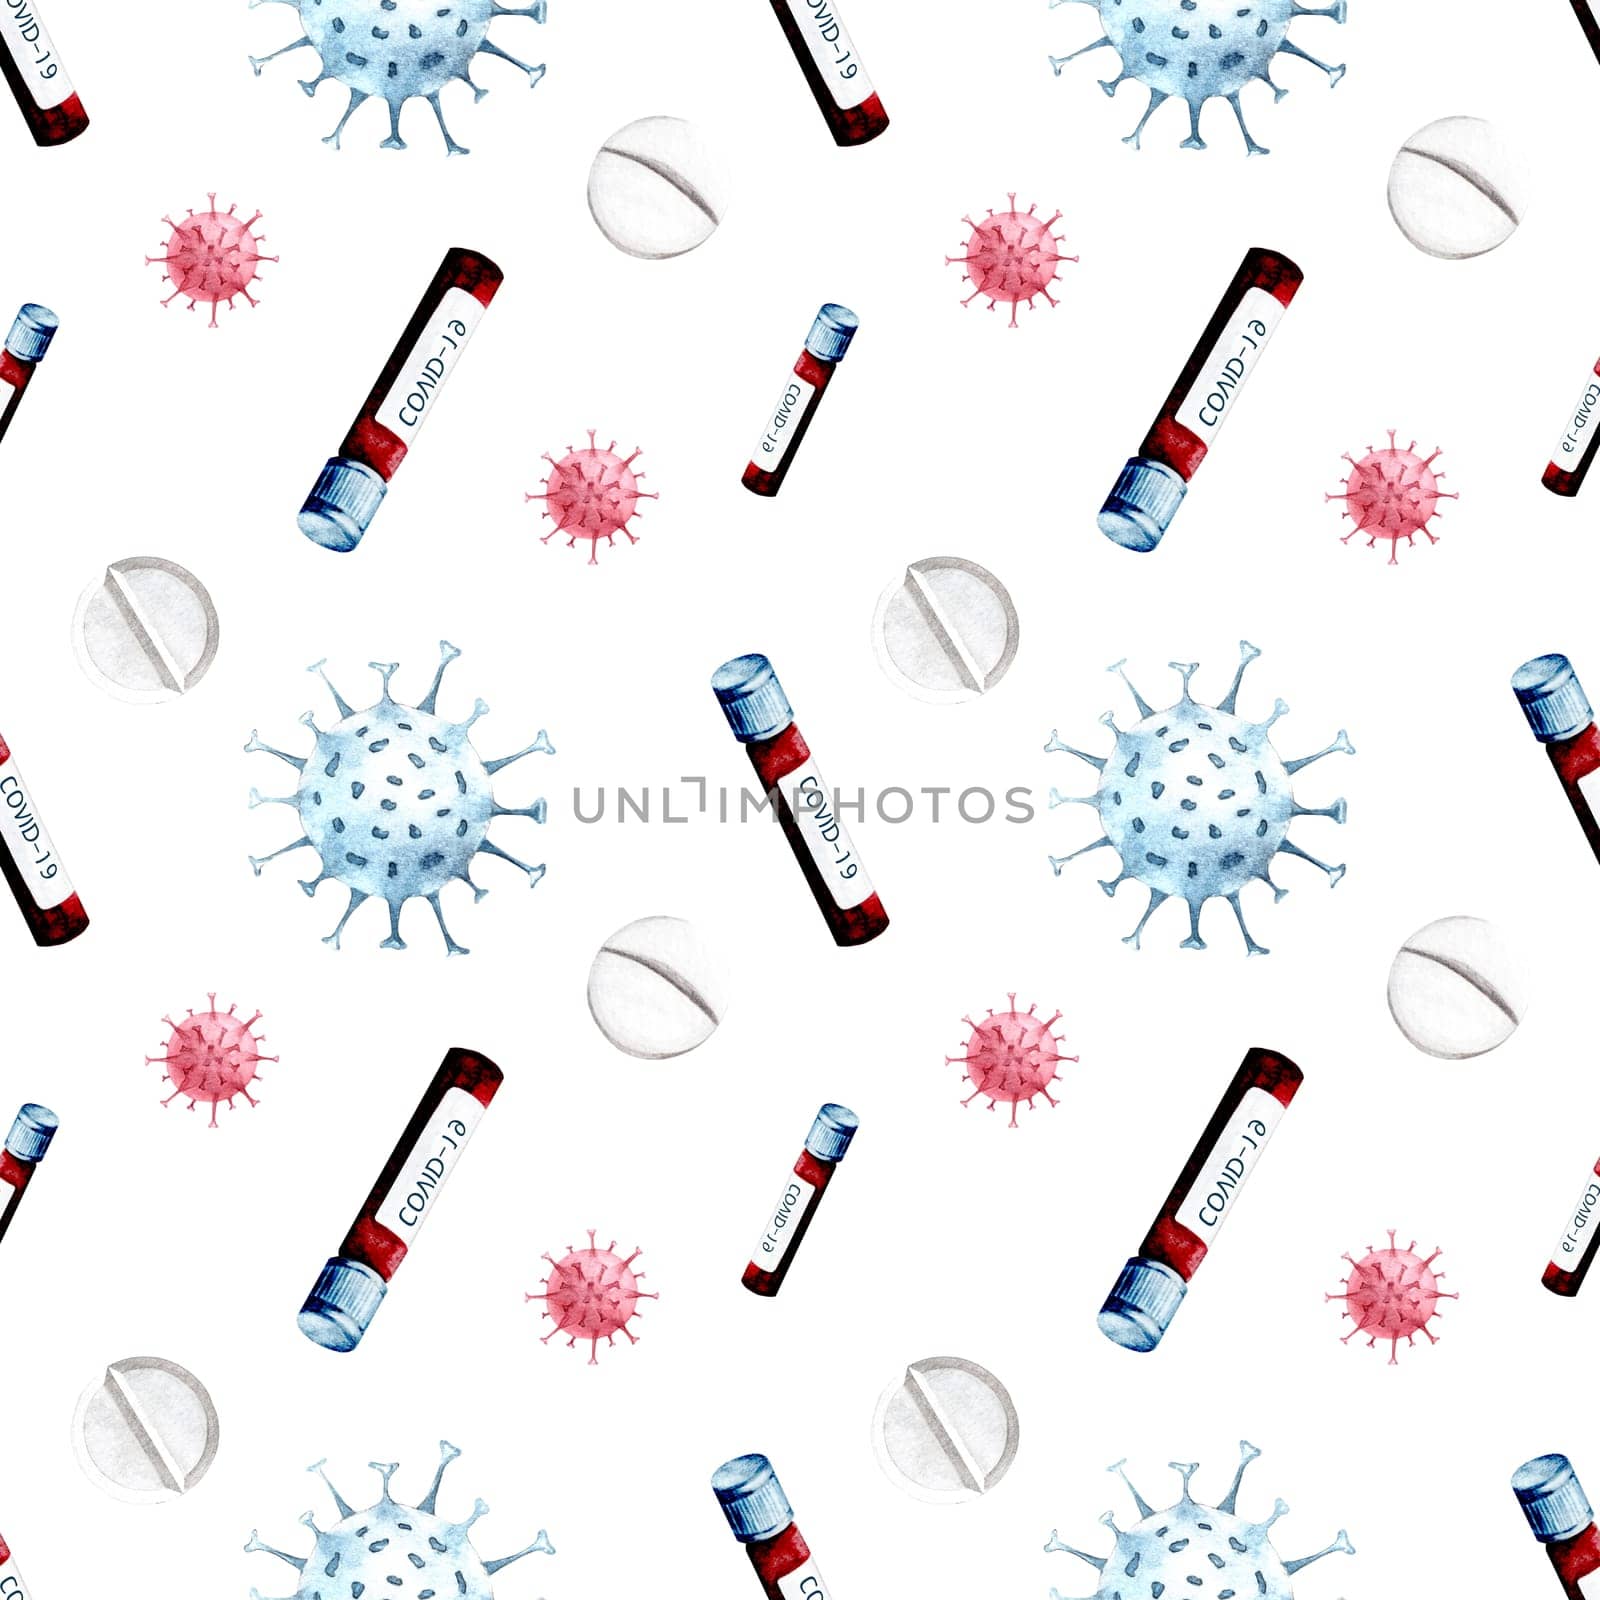 Watercolor hand drawn coronavirus medical supplies seamless pattern. Watercolour health care background with drugs, sanitizers, pills, covid-19 vaccine and tests isolated on white background.